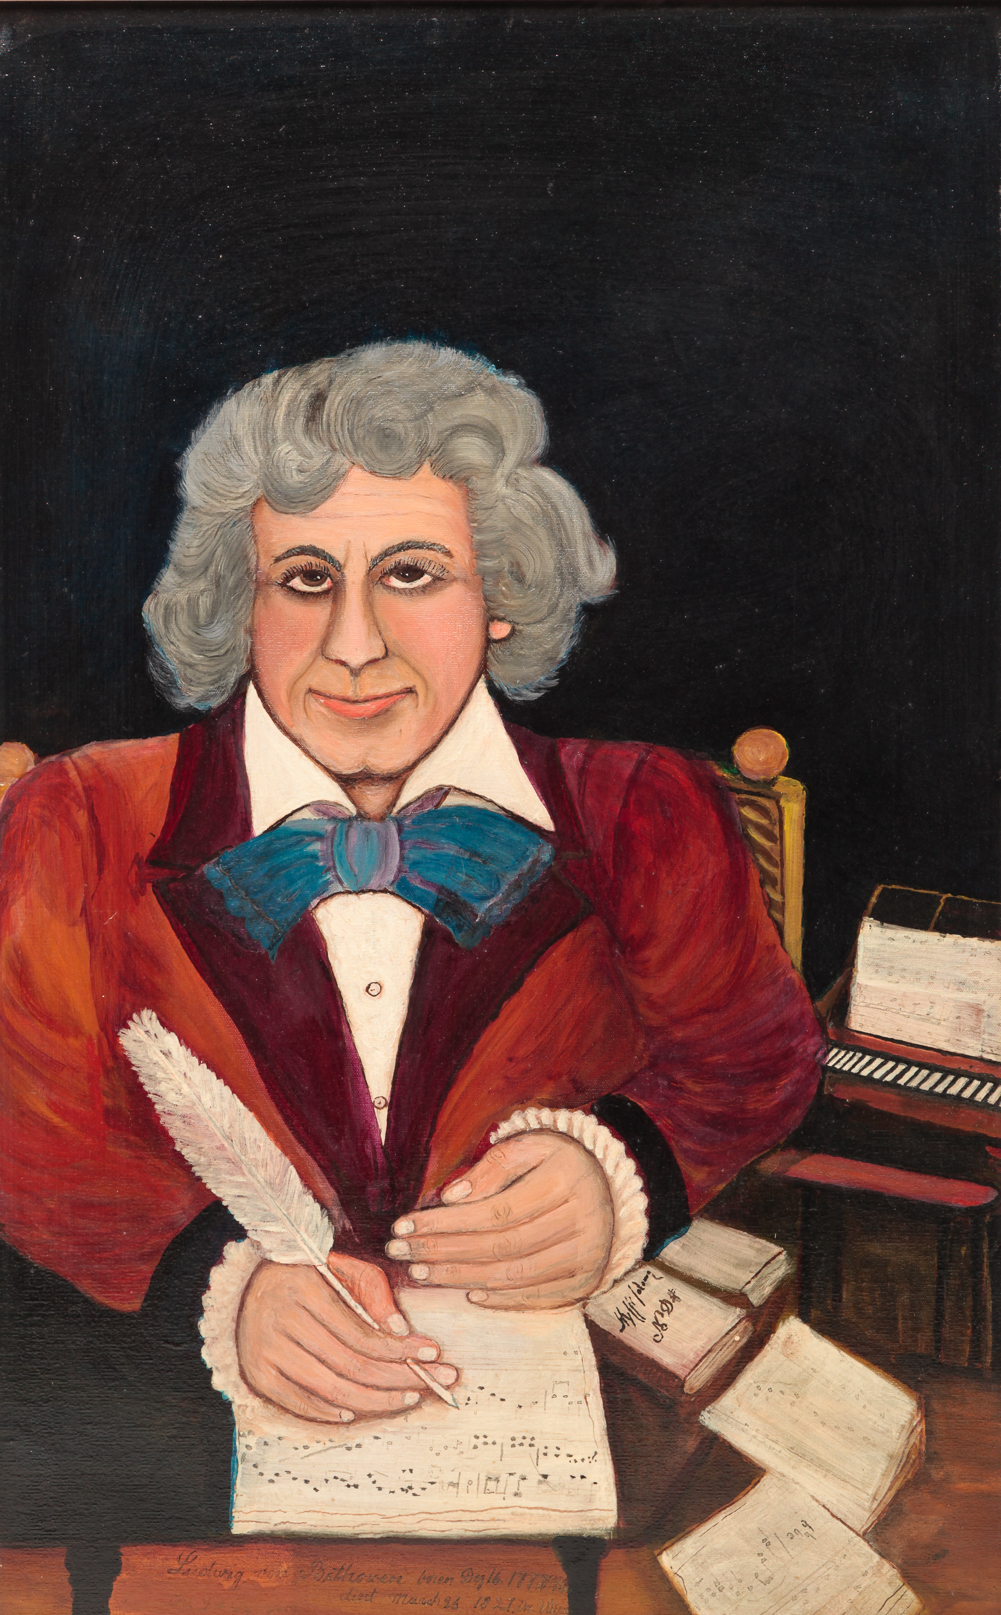 PORTRAIT OF BEETHOVEN BY FREDERICK 2dfc28